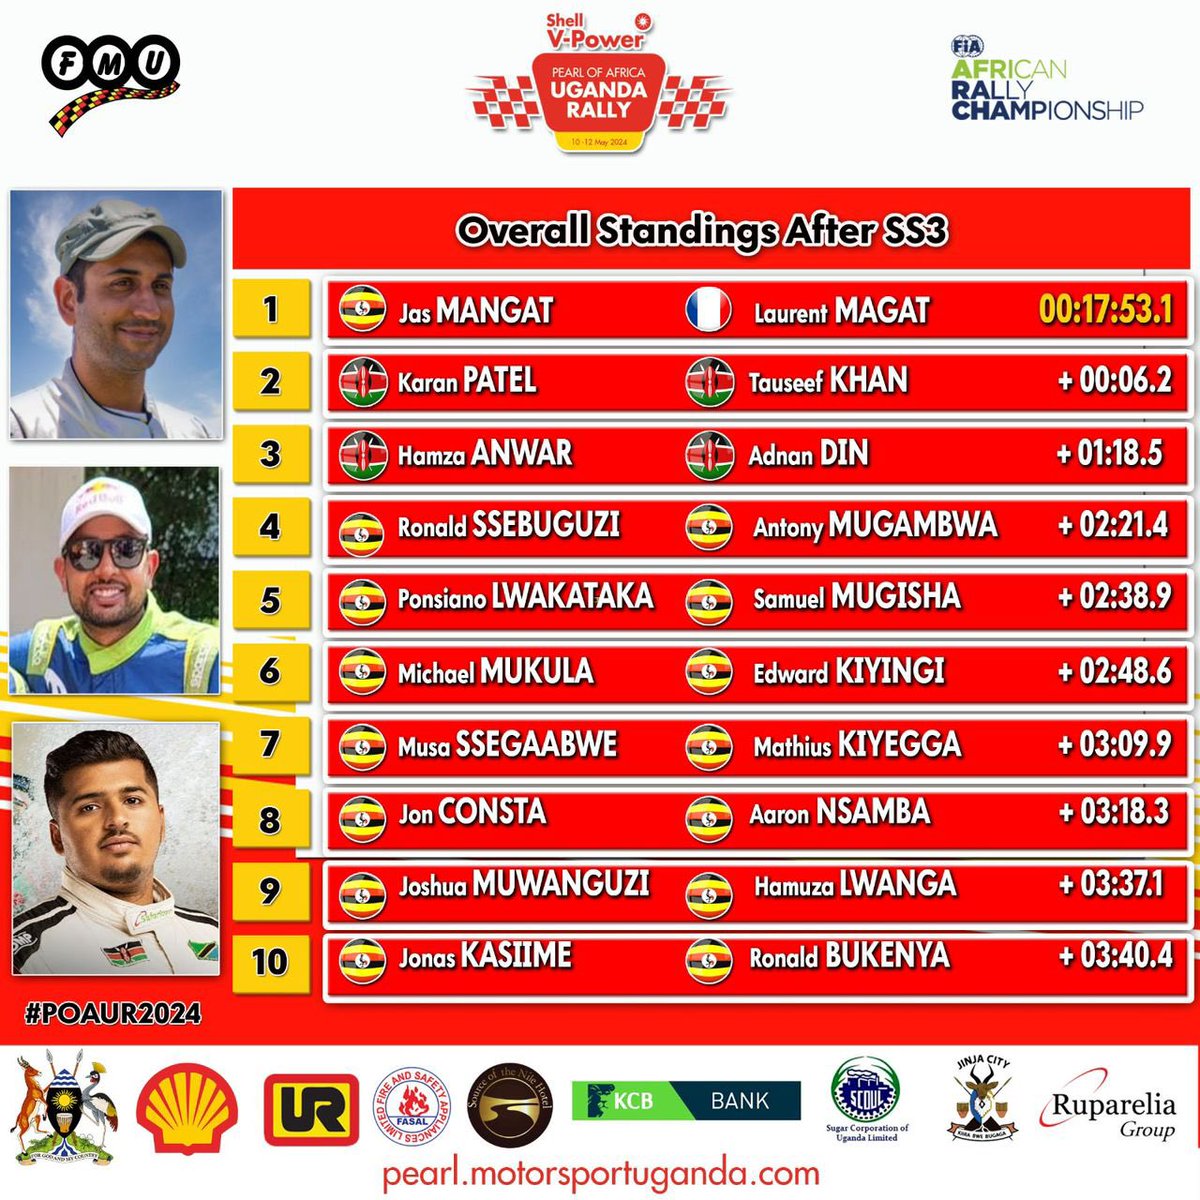 Here’s the overall standings after SS3 Jas Mangat extends his lead! First position after Stage 3, with Ronald Ssebuguzi holding strong in fourth! #ShellVPower #POAUR2024